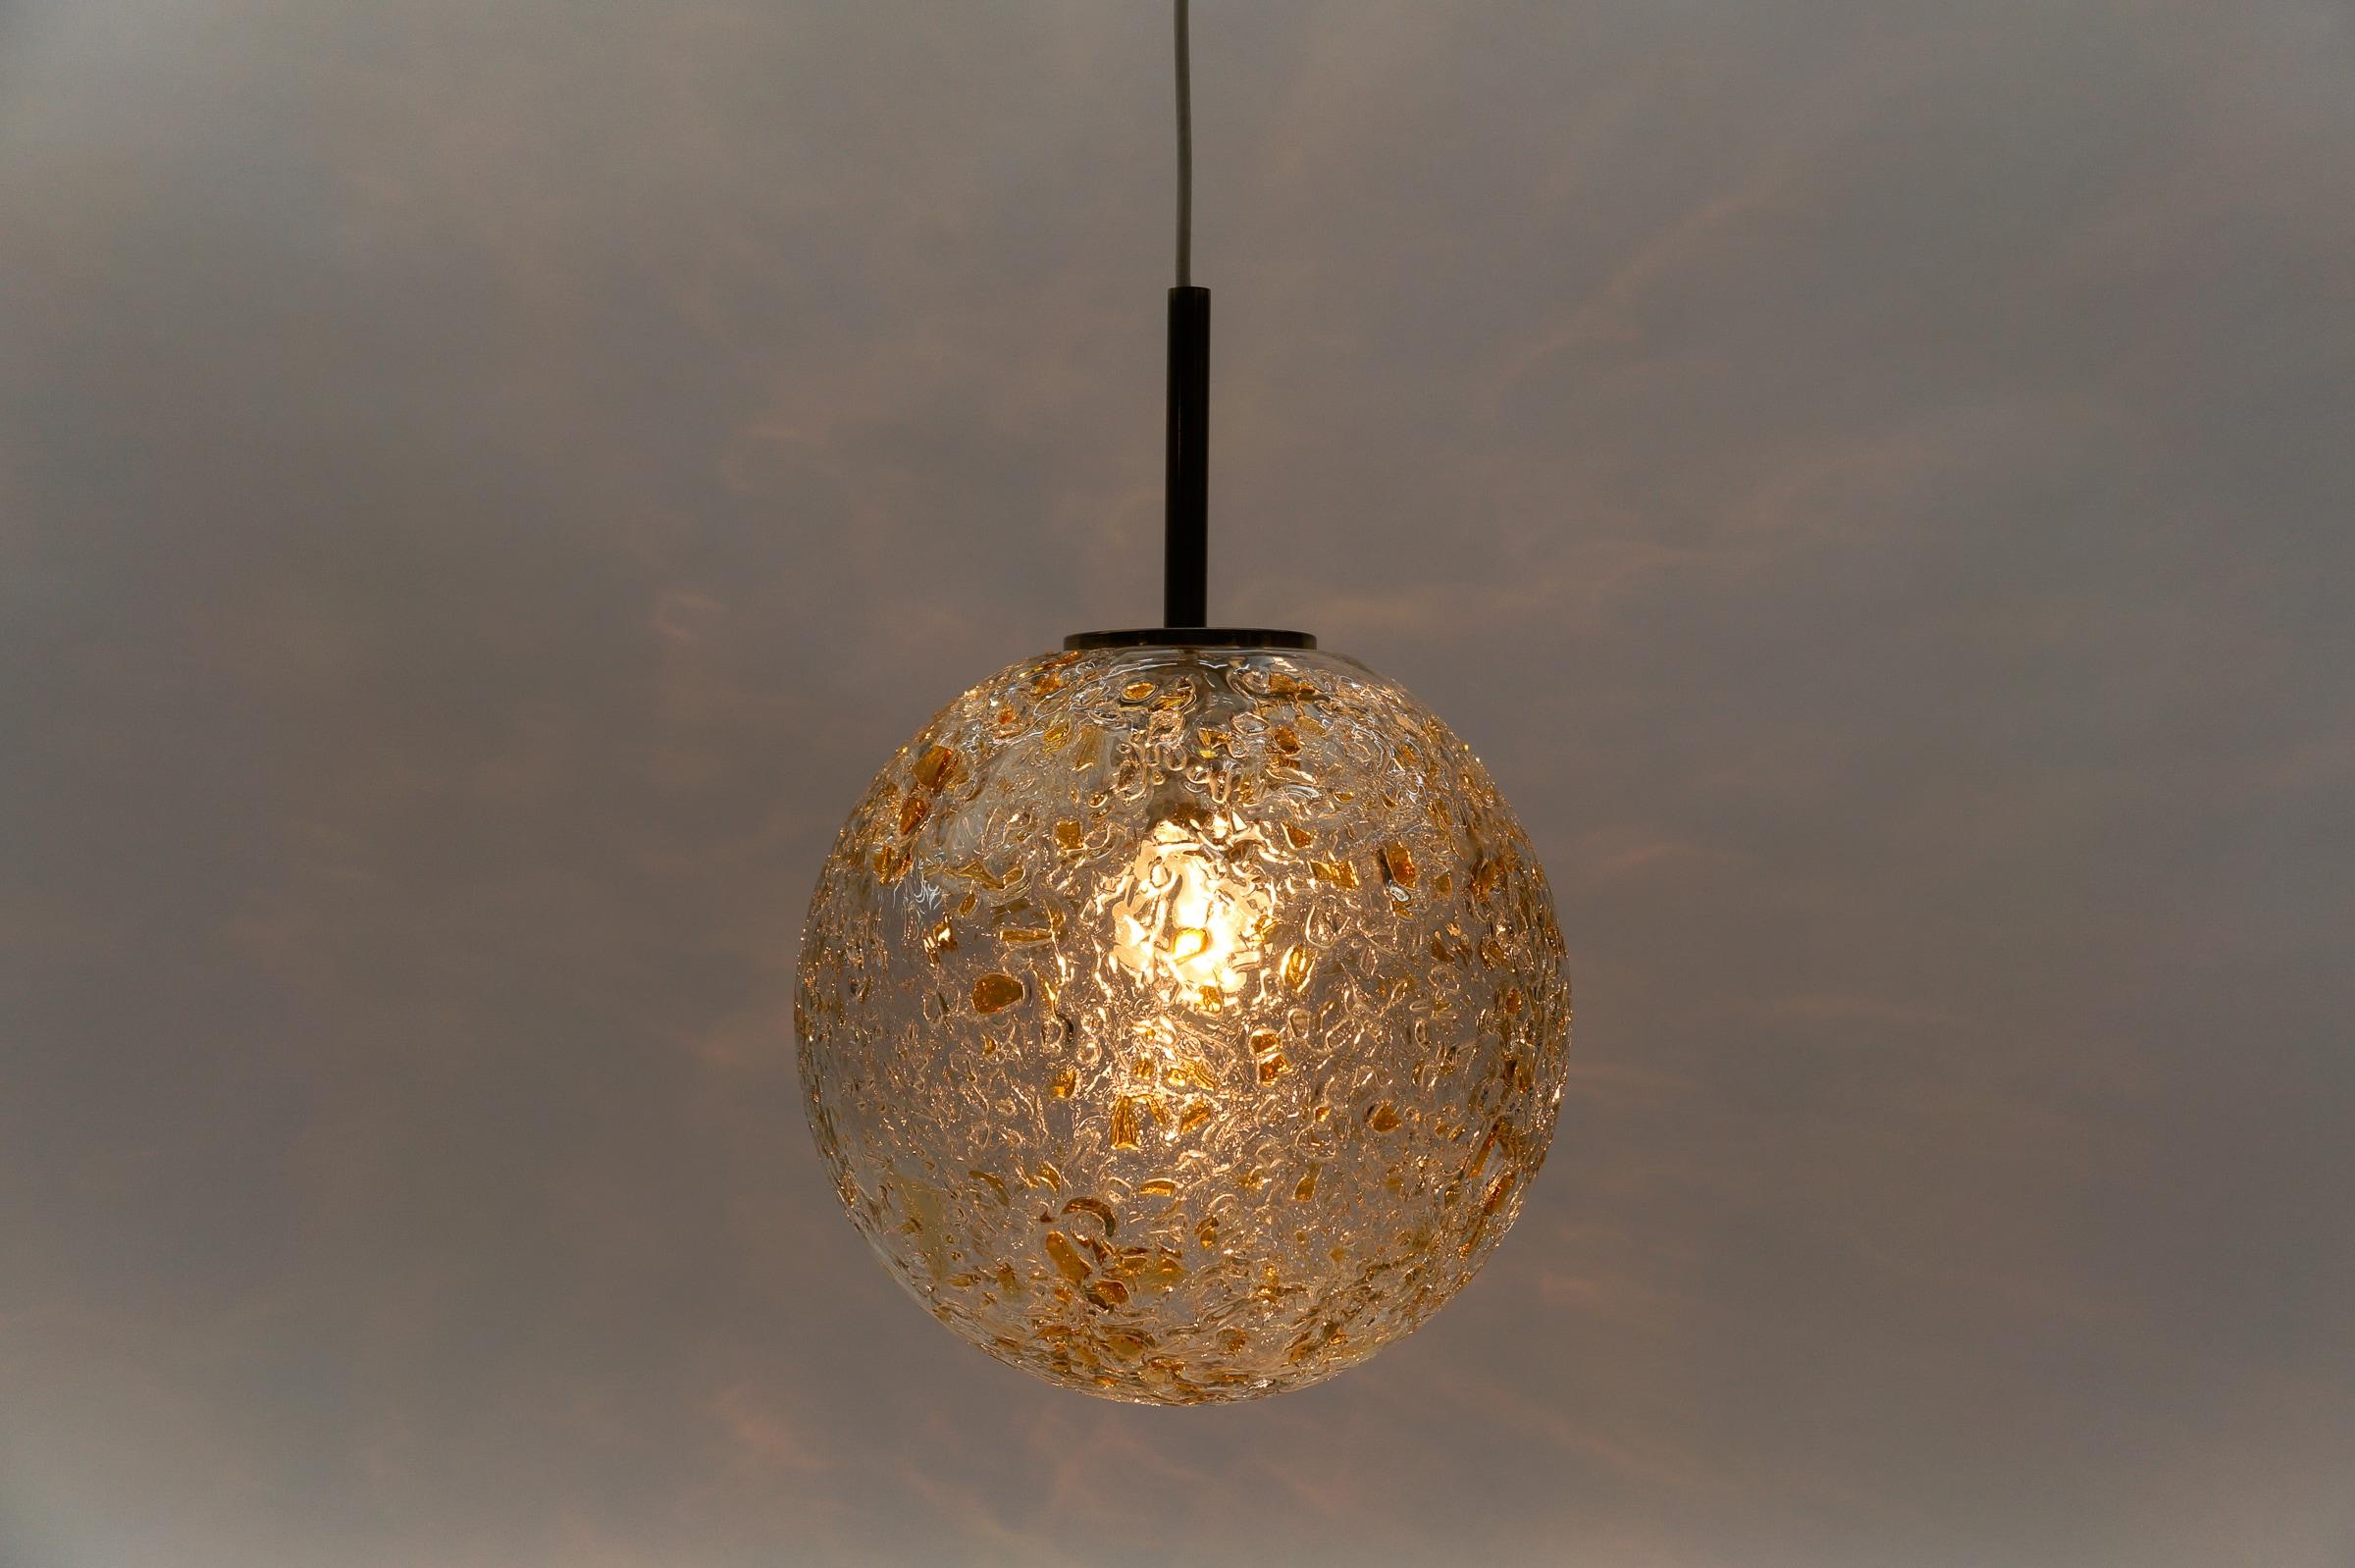 Metal Lovely Mid-Century Modern Glass Ball Pendant Lamp by Doria, 1960s Germany For Sale